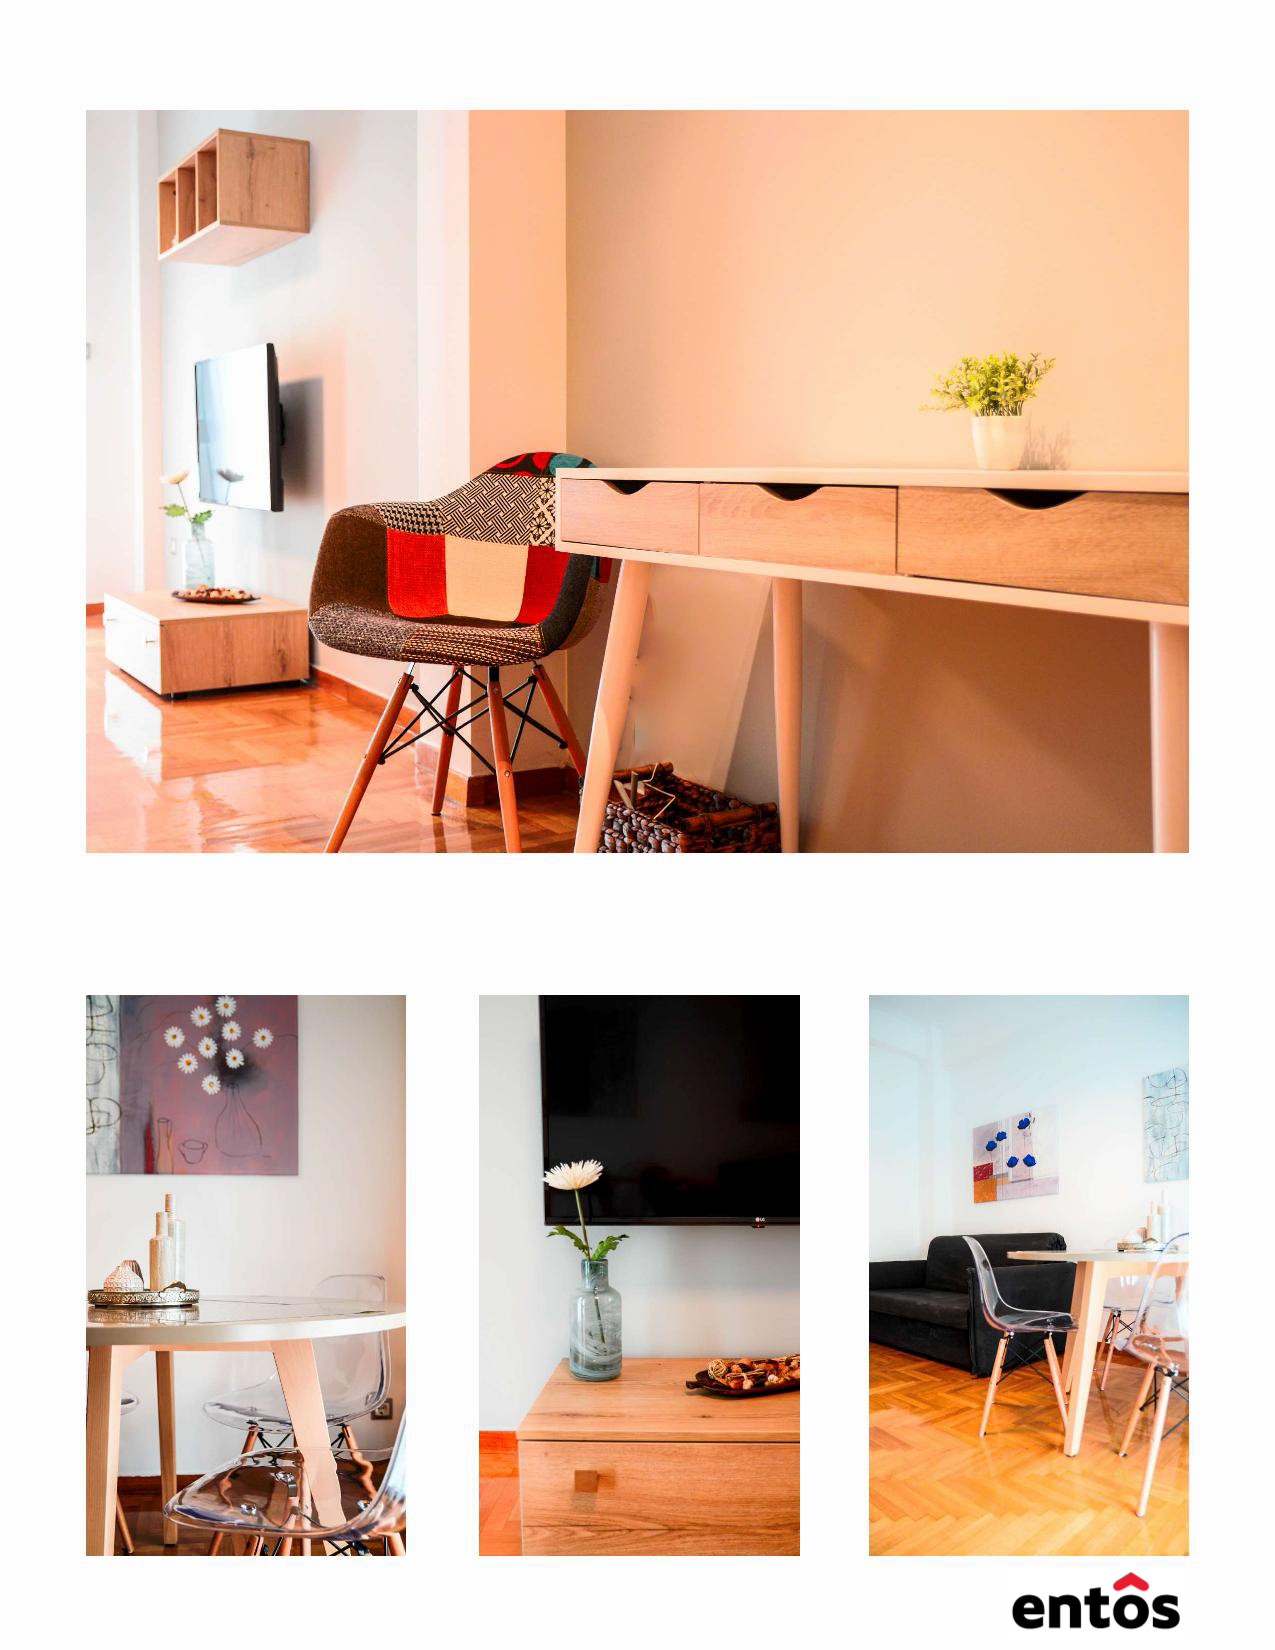 Airbnb Images 2